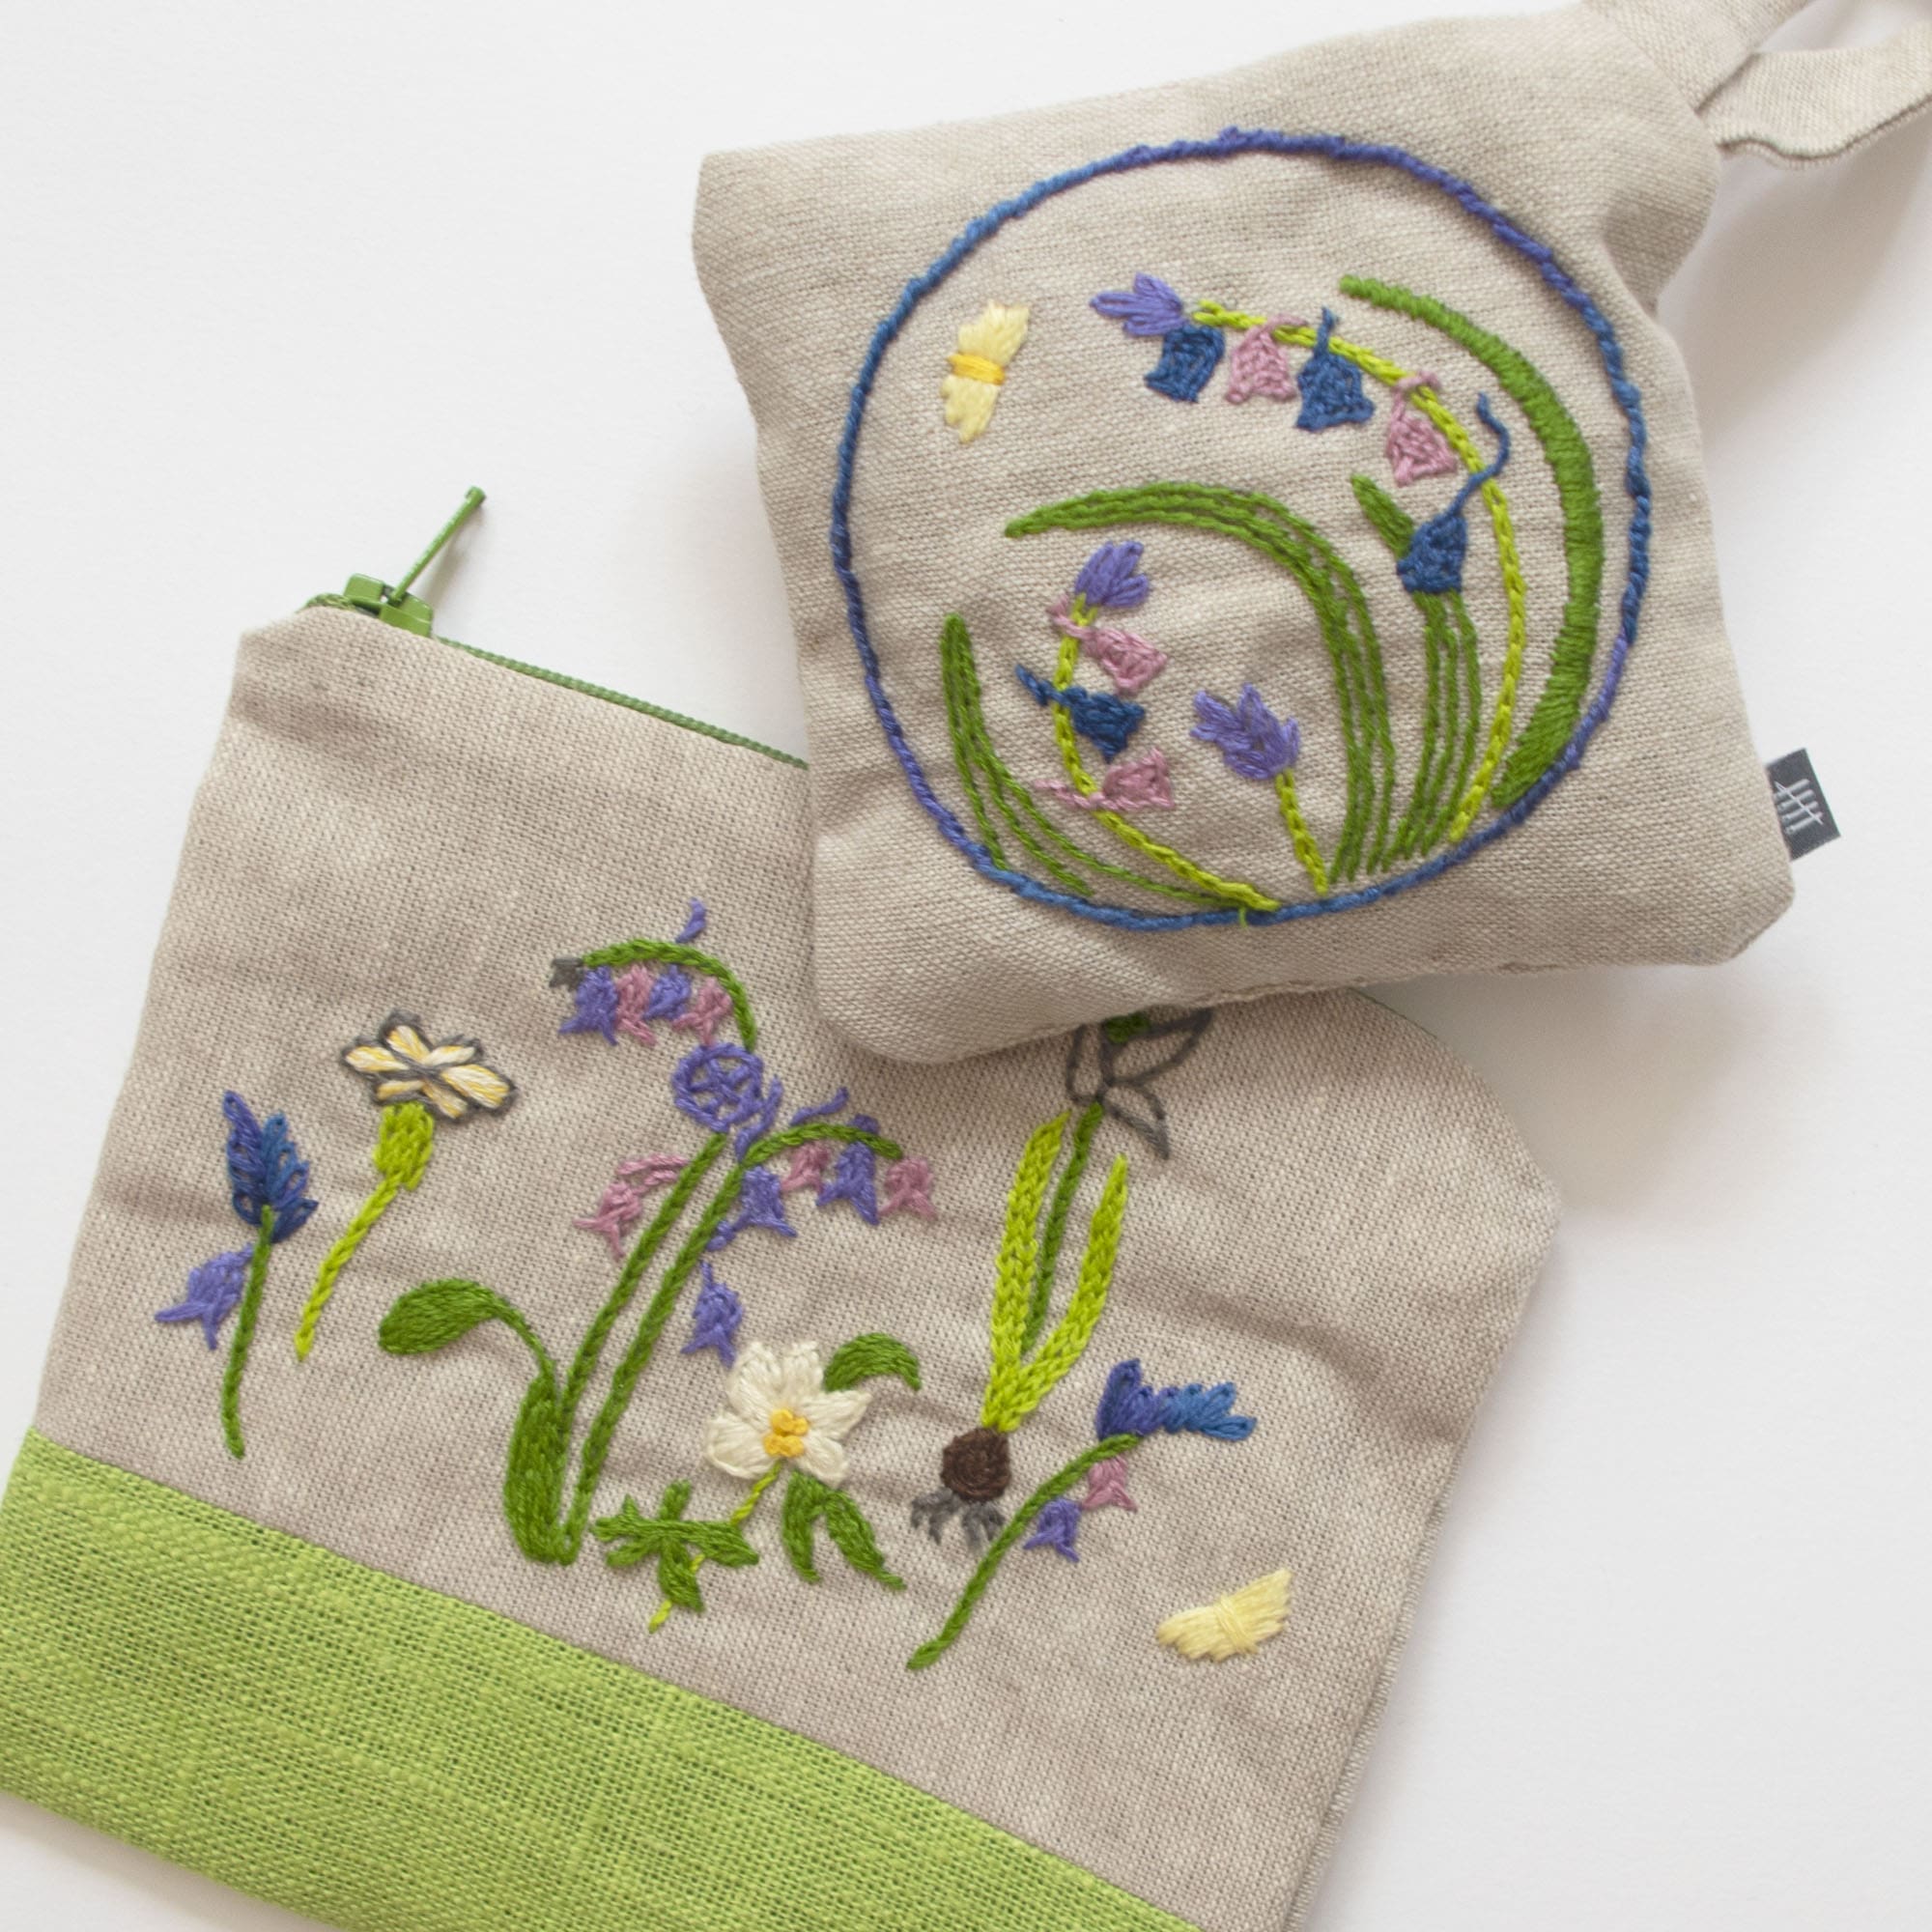 Fine Cell Work Hand-Embroidered Plantlife Linen Purse and Organic Lavender Bag Floral Insects Green Grey Purple Handmade in Prison